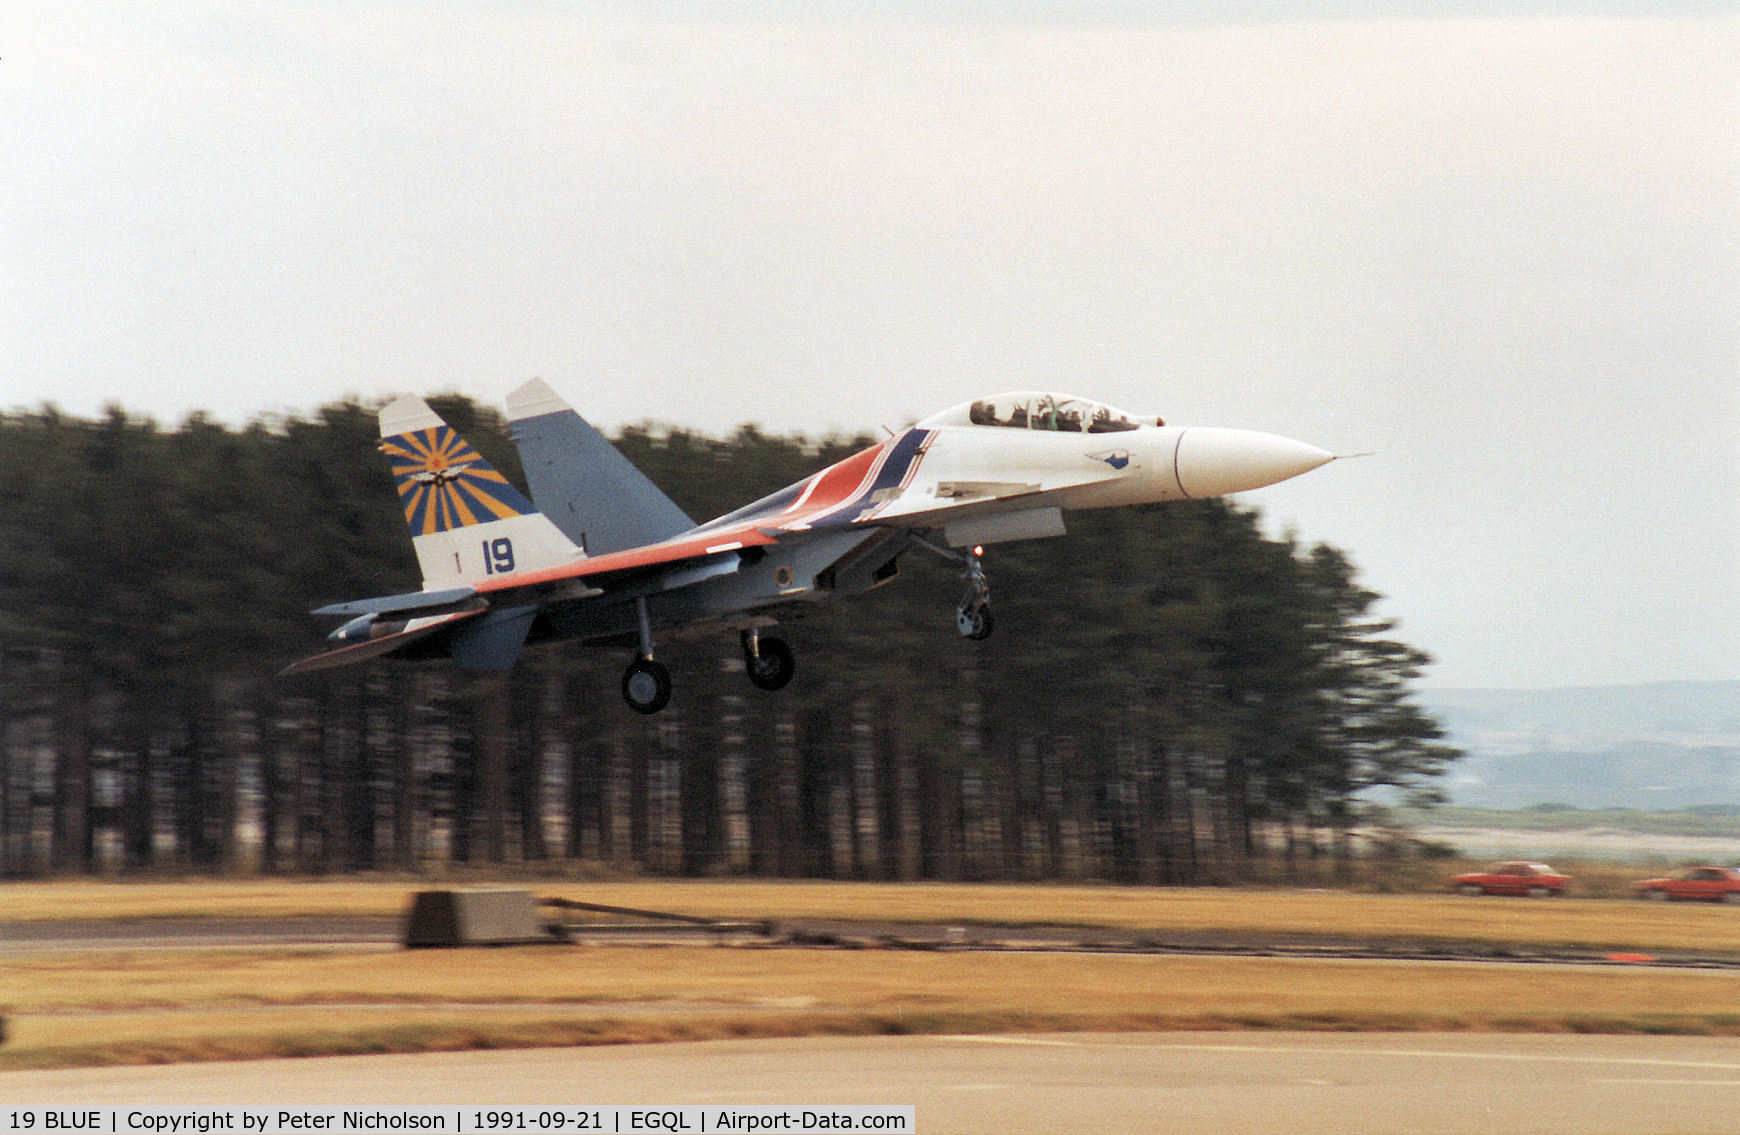 19 BLUE, Sukhoi Su-27UB C/N 1040807, Flanker C of the Russian Knights display  team landing at the 1991 RAF Leuchars Airshow.